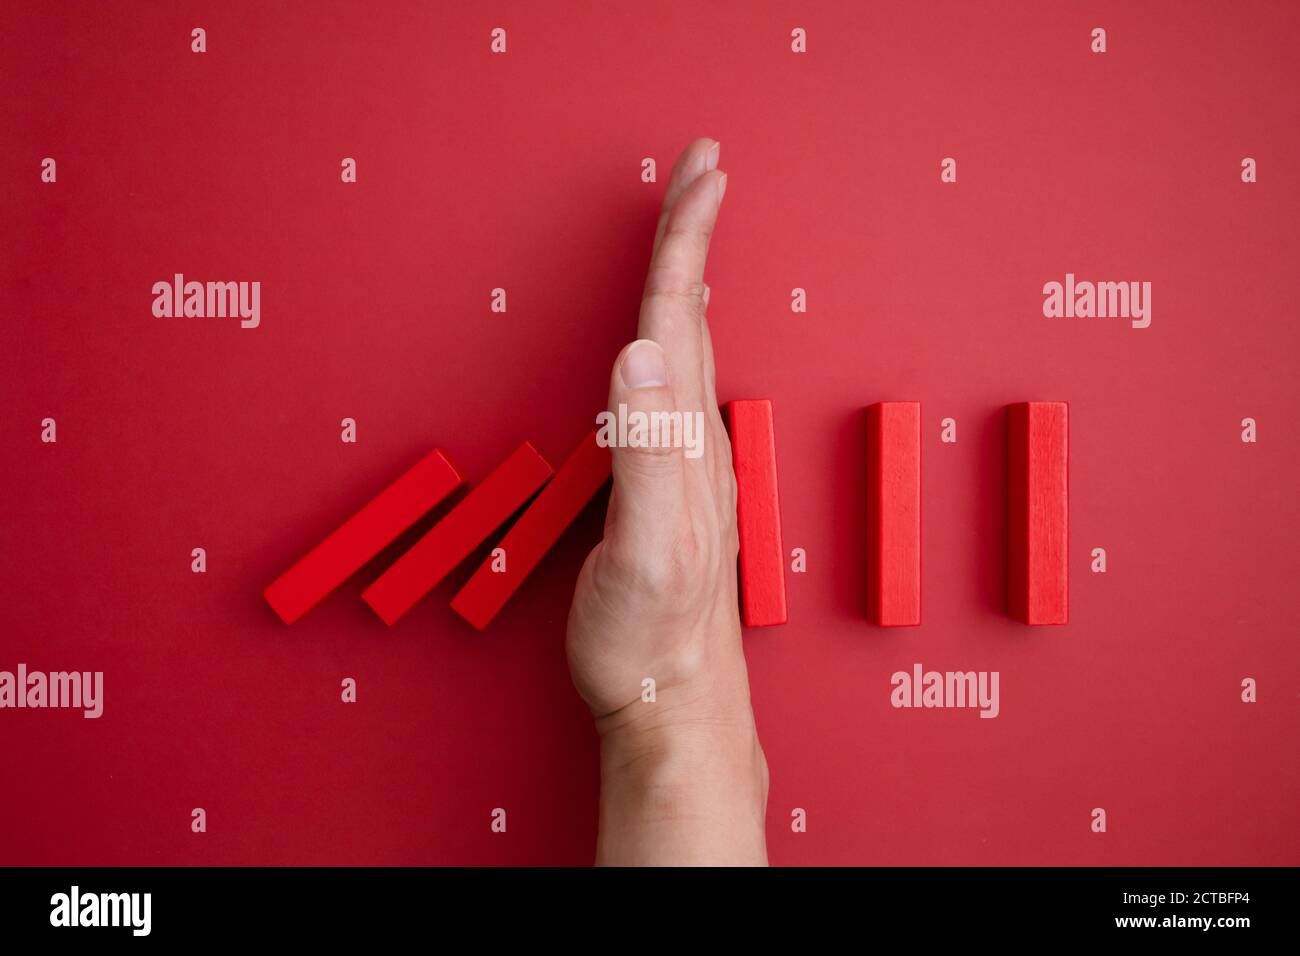 red domino blocks that begins to fall and a hand that prevents it from falling. Stock Photo